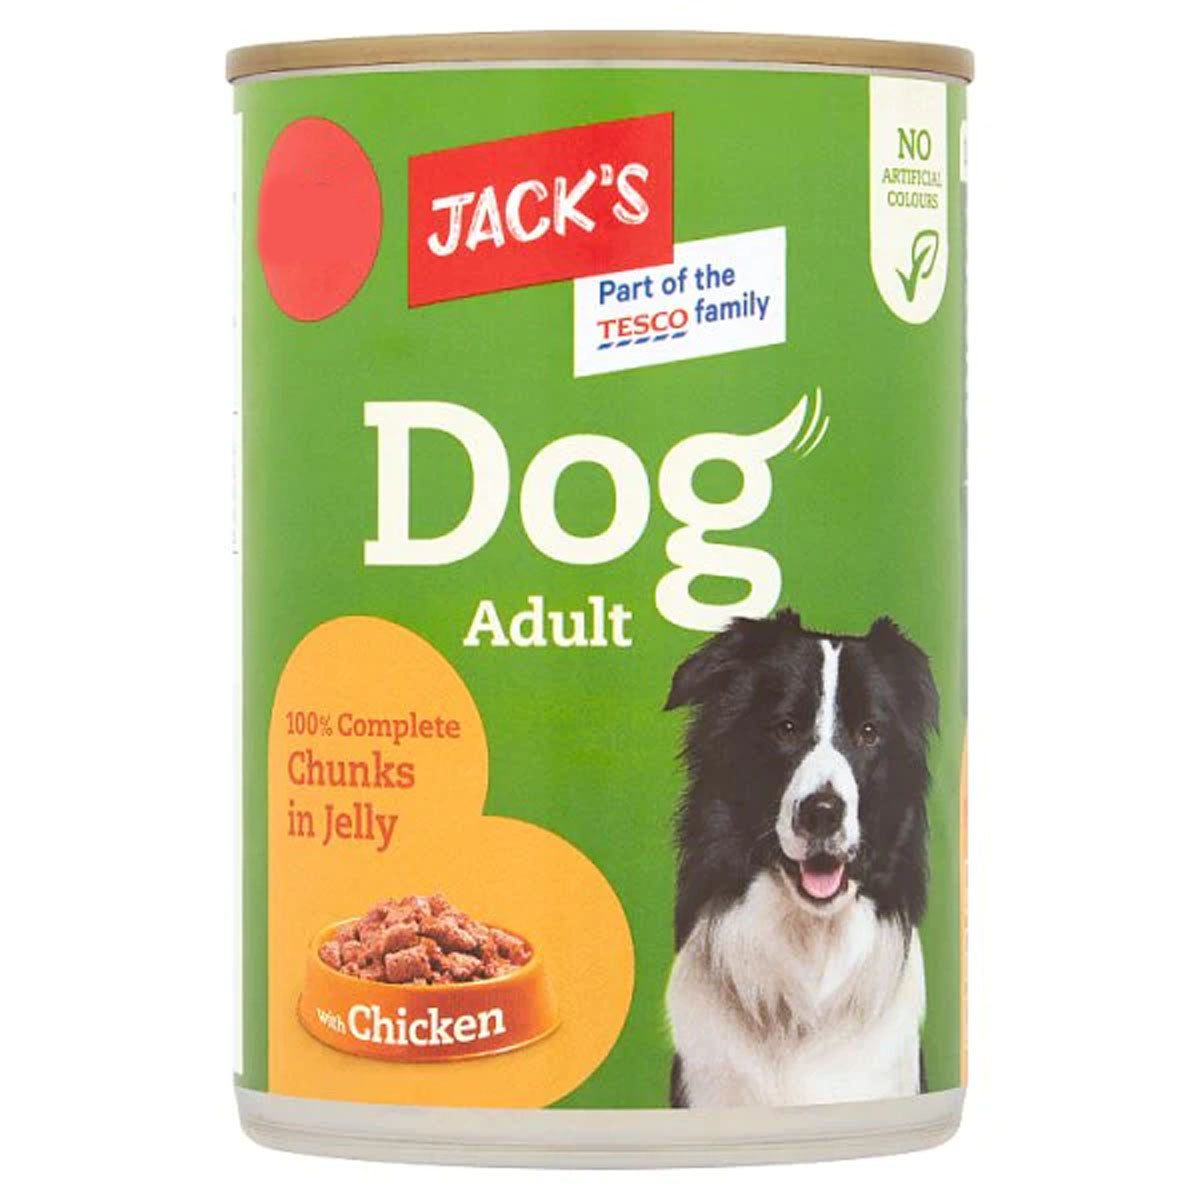 Jack's - Dog Adult 100% Complete Chunks in Jelly with Chicken - 415g - Continental Food Store